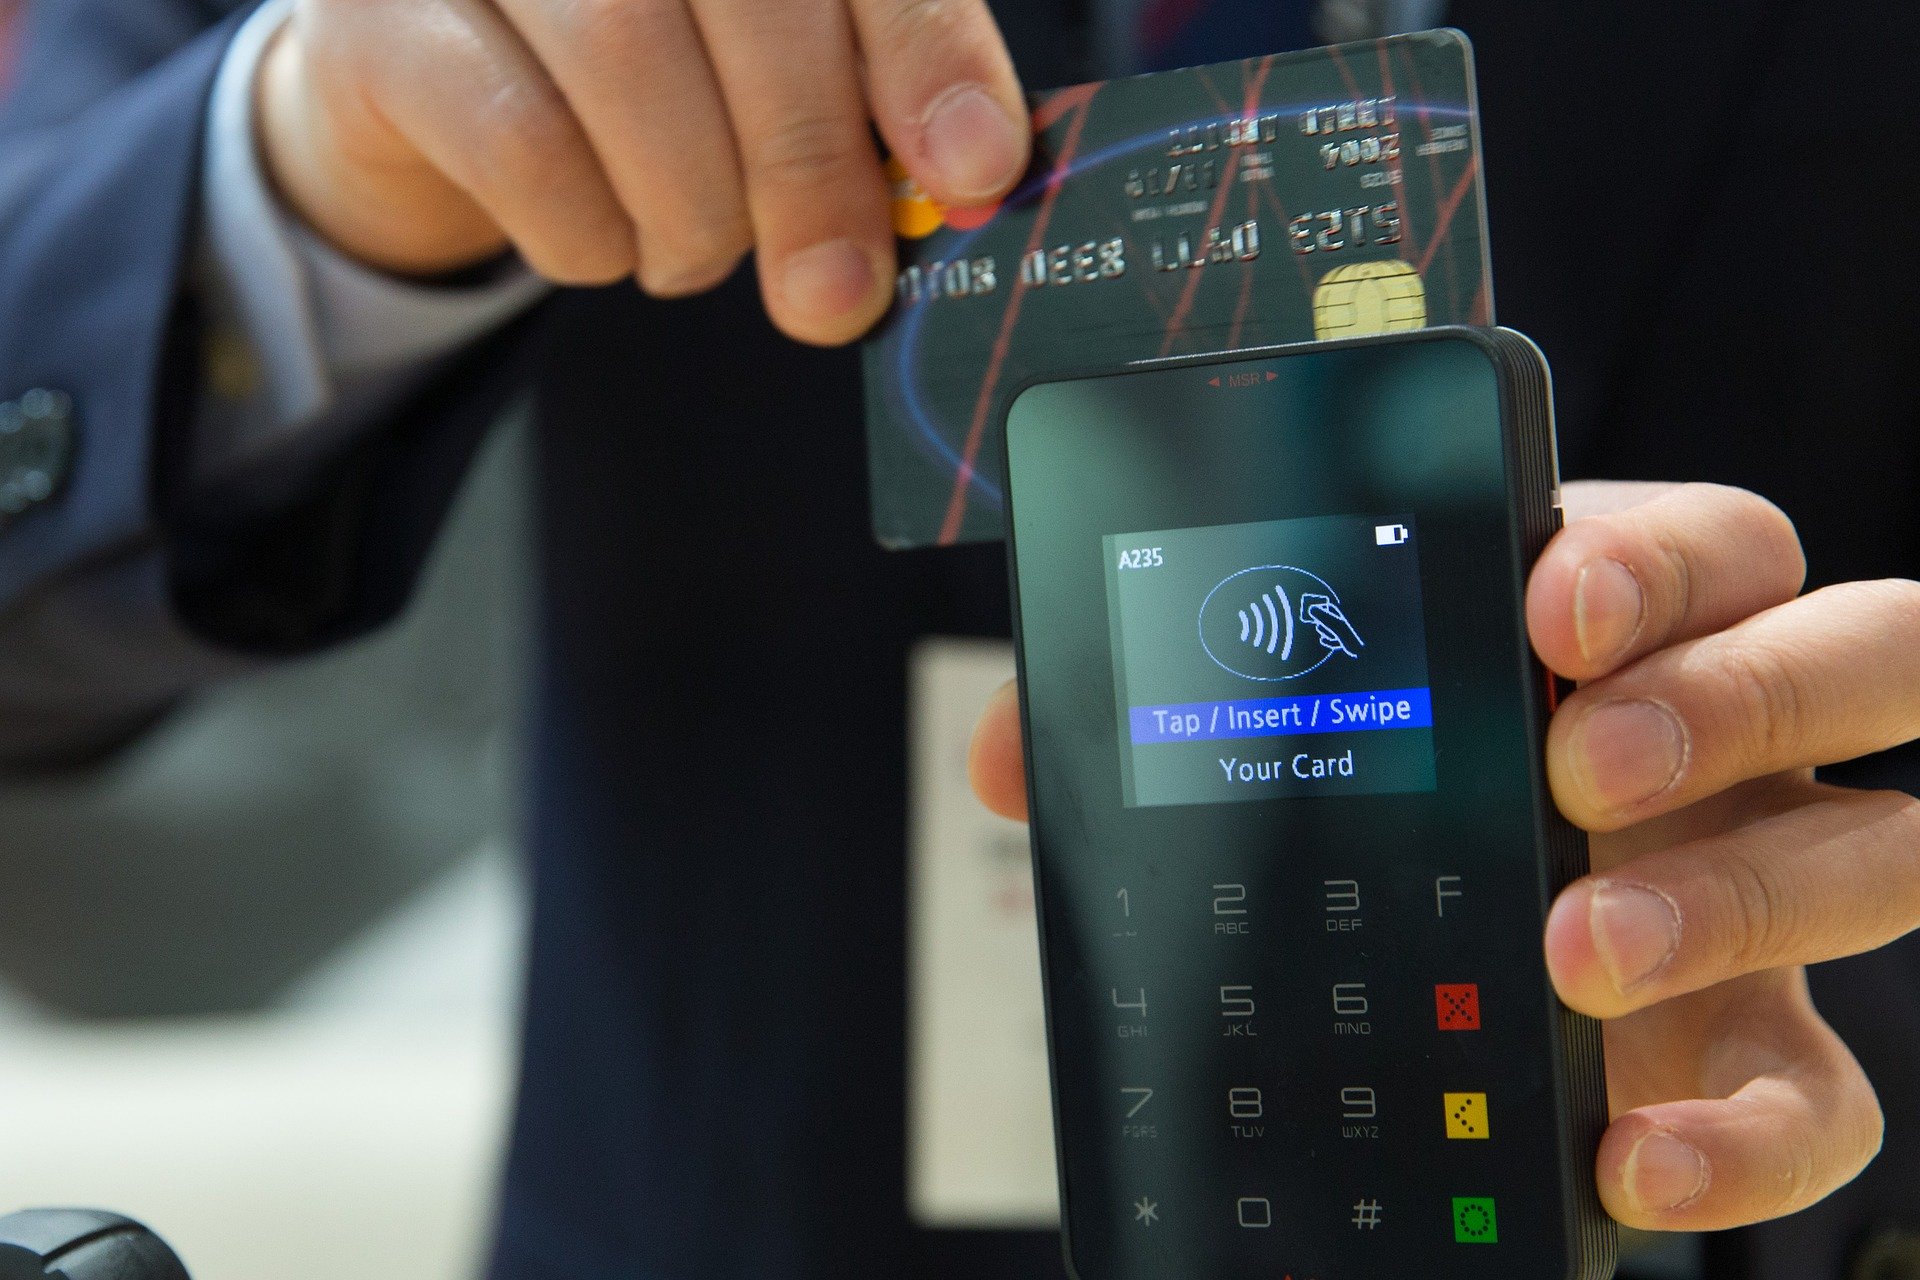 The first transaction using Visa EMV 3D-Secure 2 was made in Russia